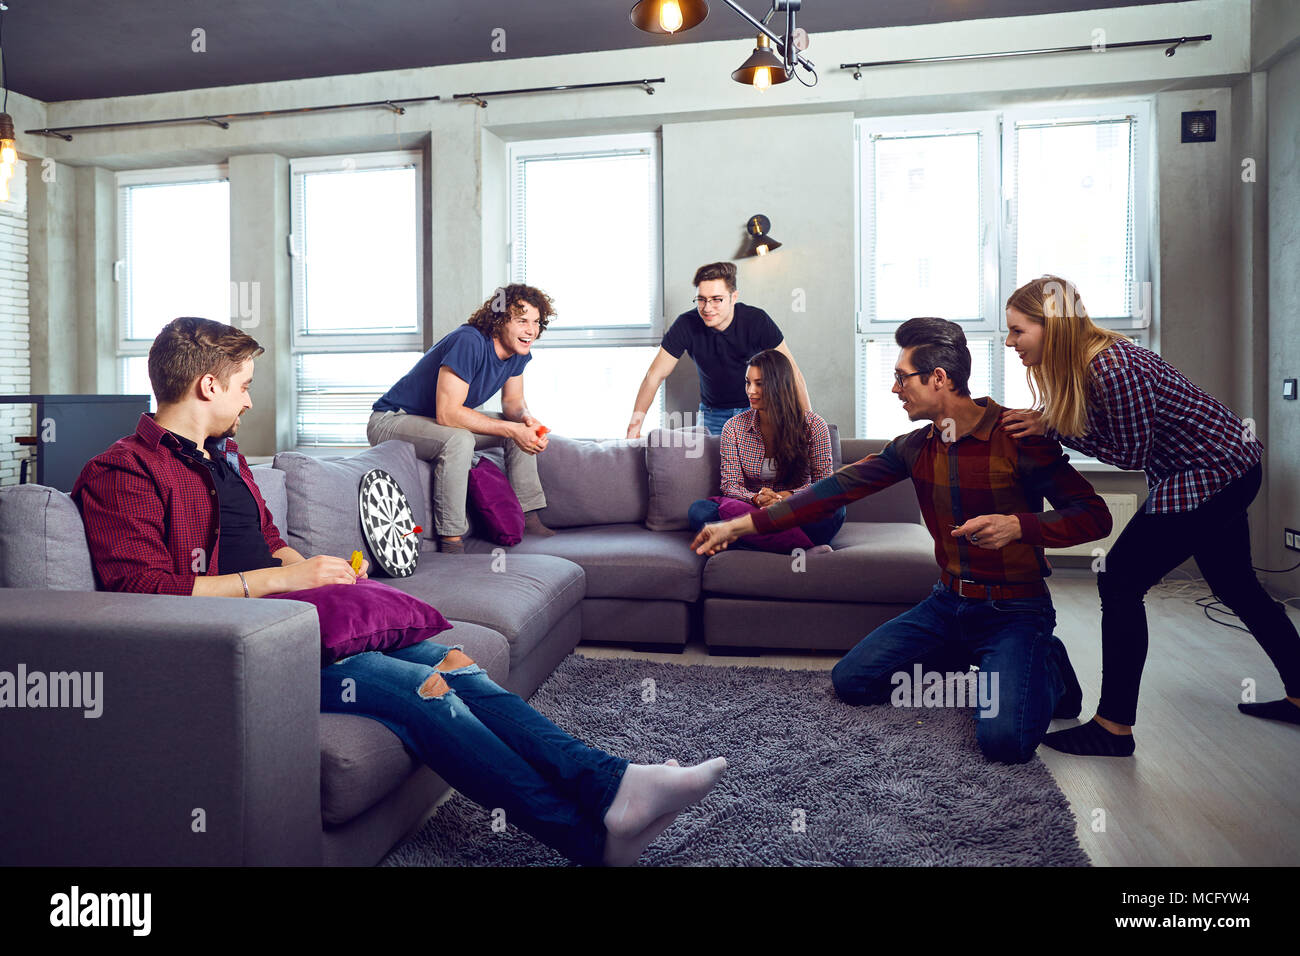 A cheerful group of young people play board games in the room. Stock Photo